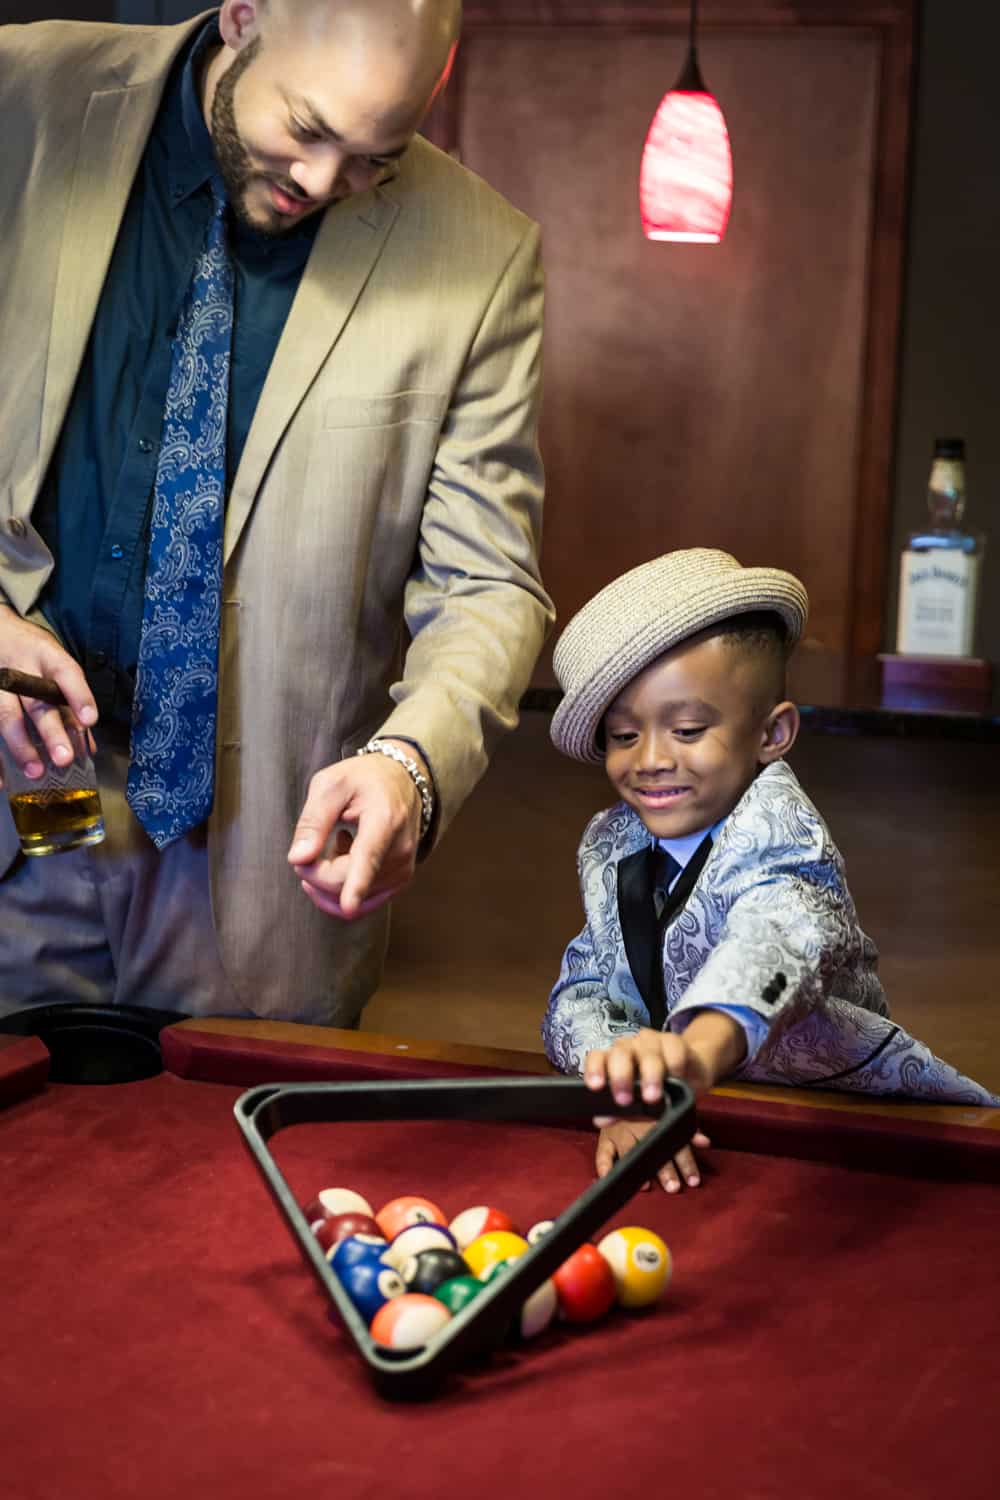 Man helping little boy learn to rack pool balls during a family reunion portrait